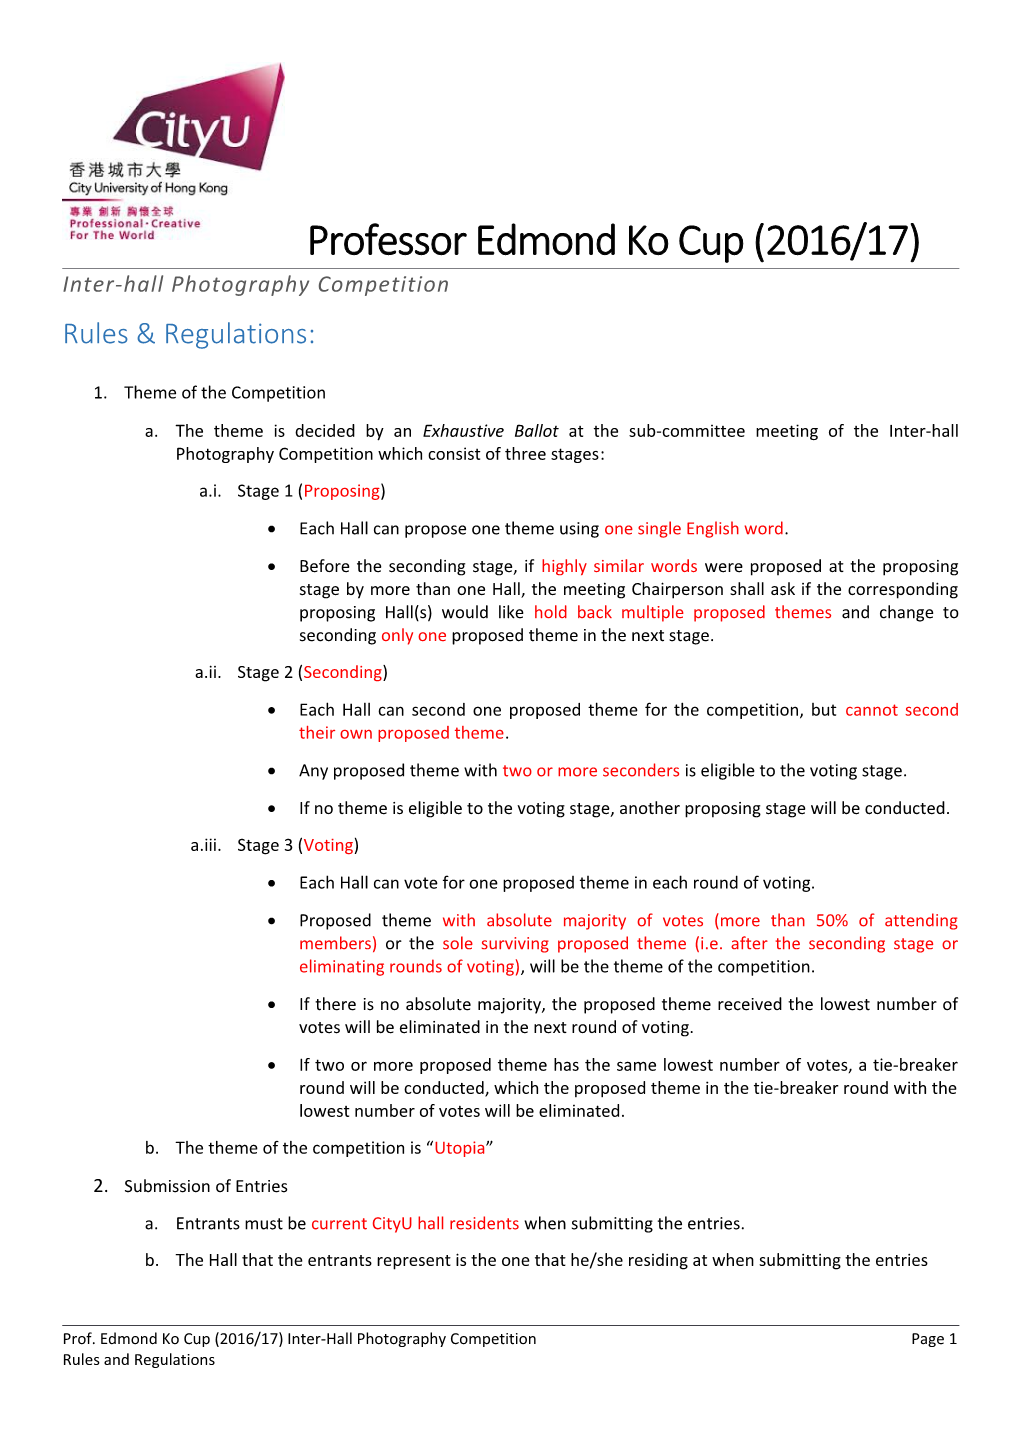 Prof. Edmond Ko Cup Inter-Hall Photography Competition Rules 201415